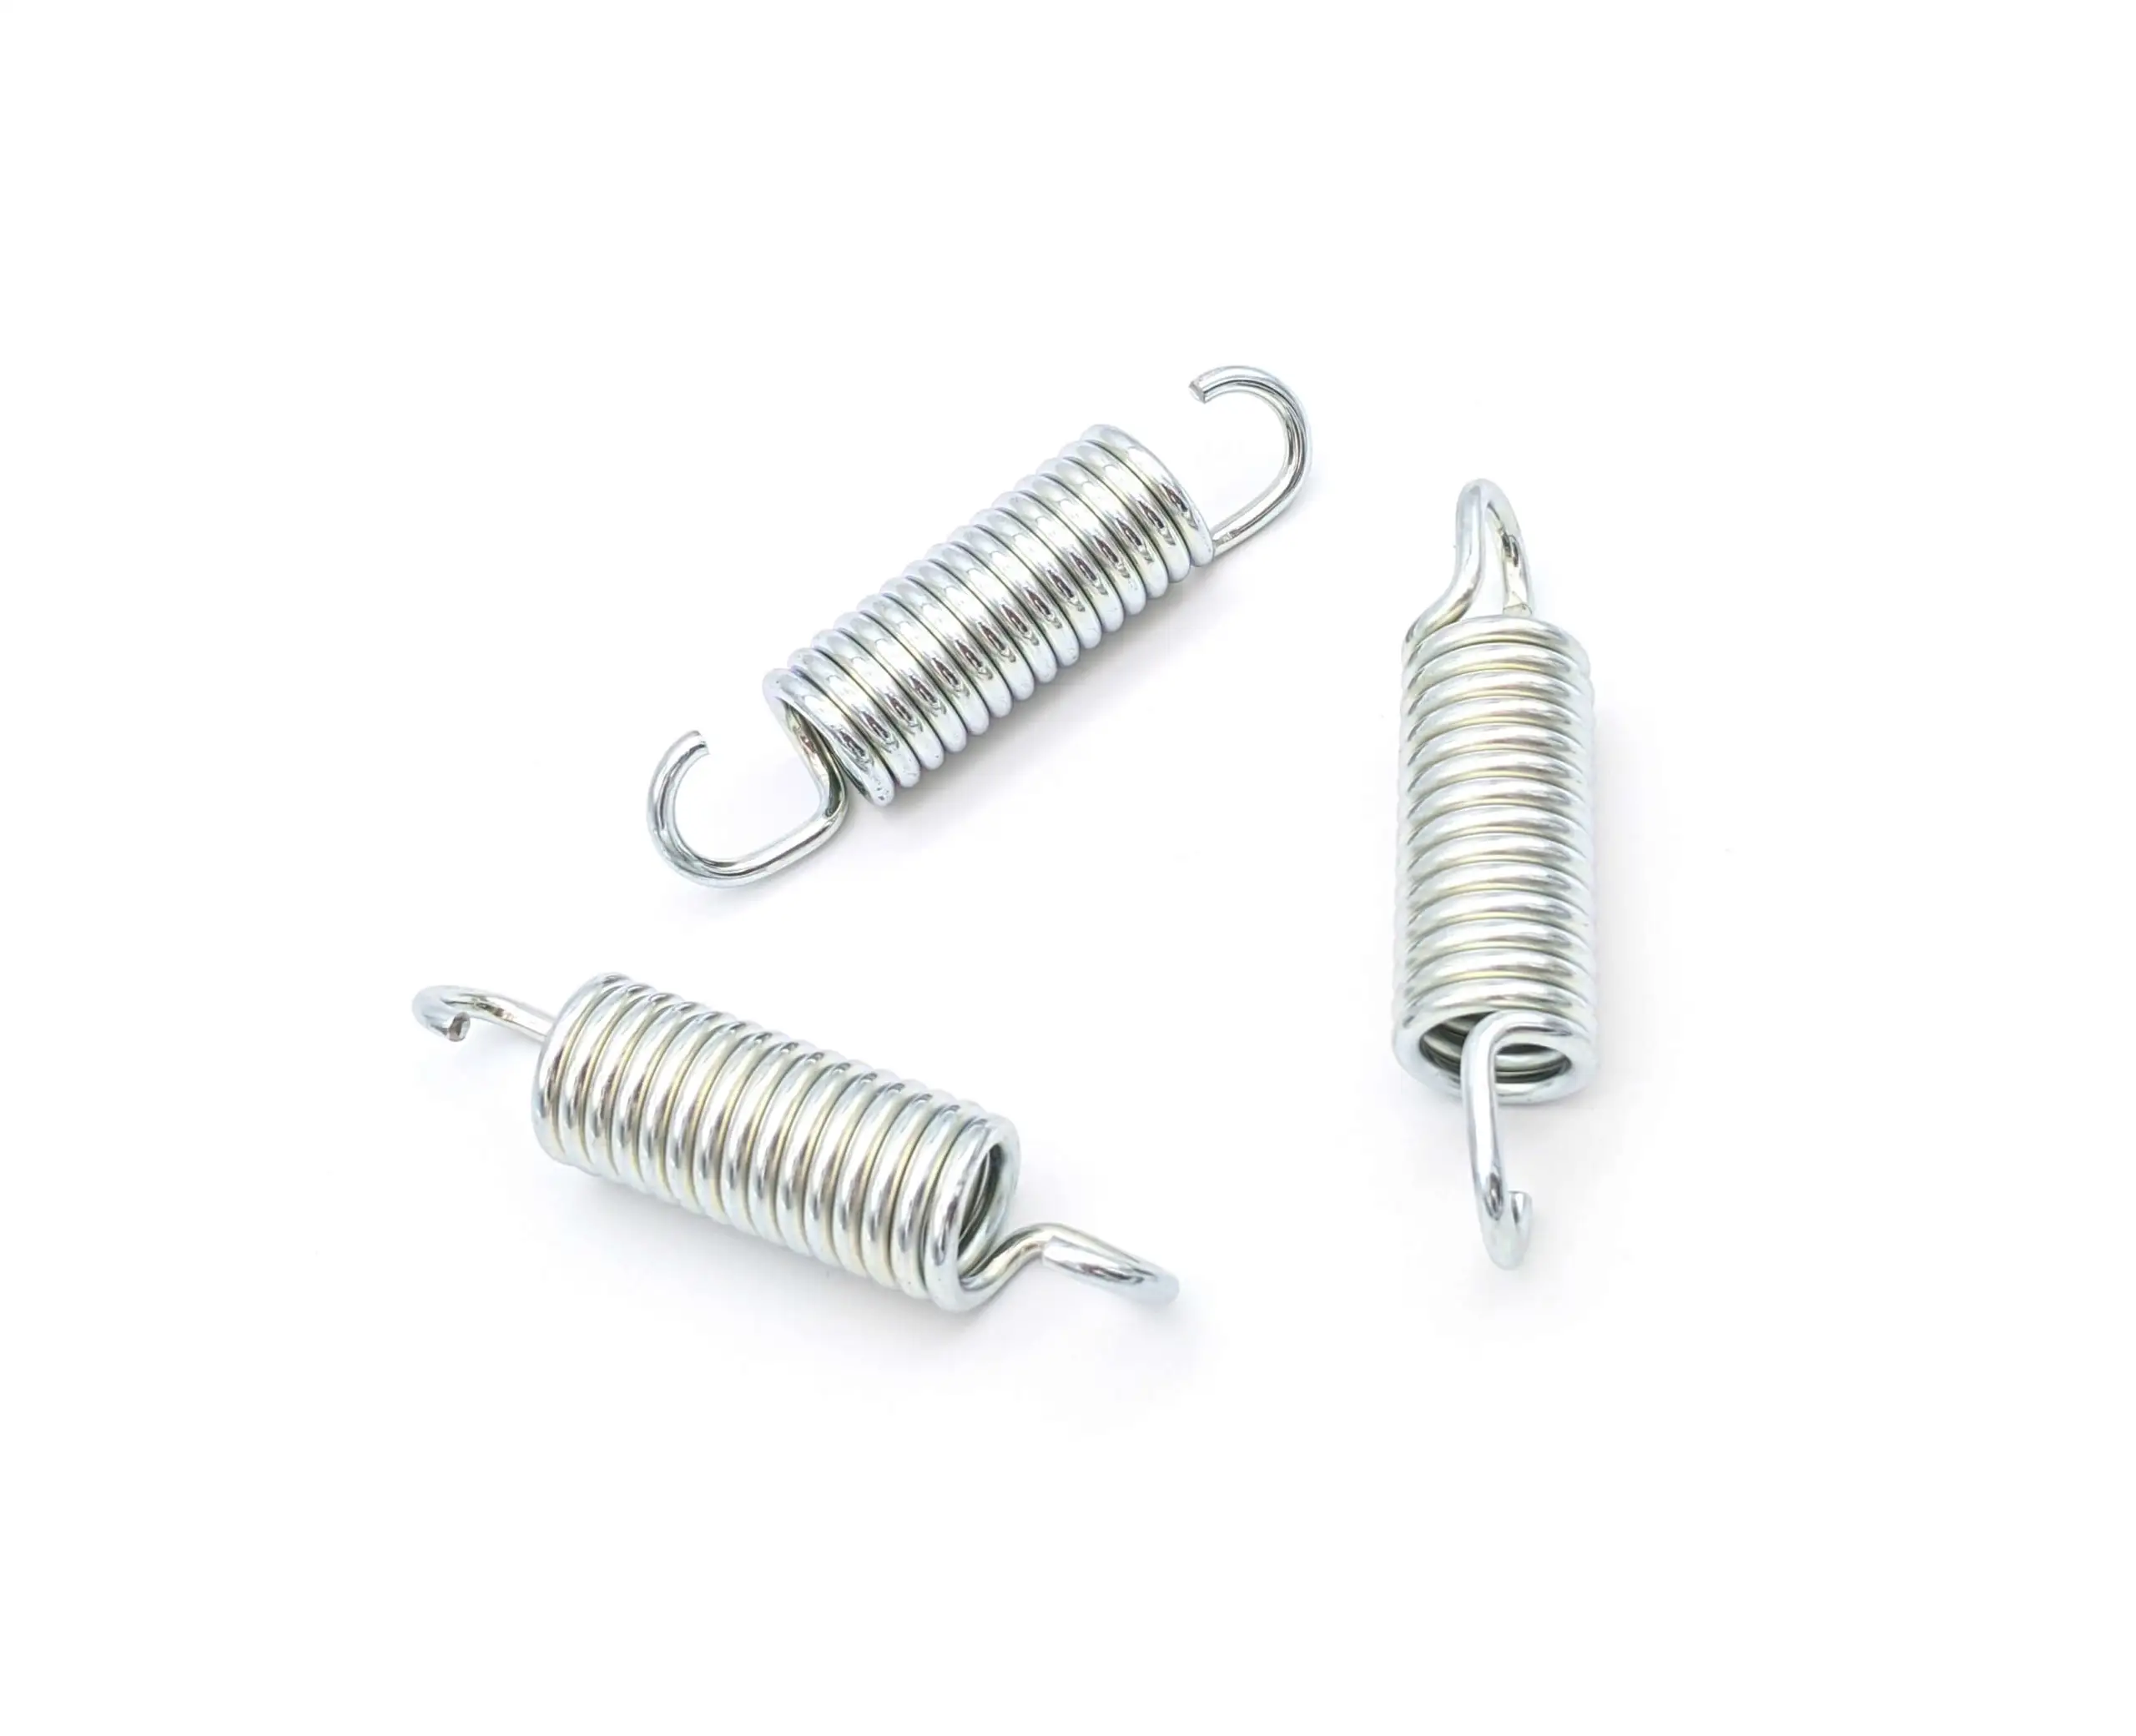 Spring spiral steel for garage door clock cable bed clamp spring pocket double irich wire compressor twist torsion coil springs